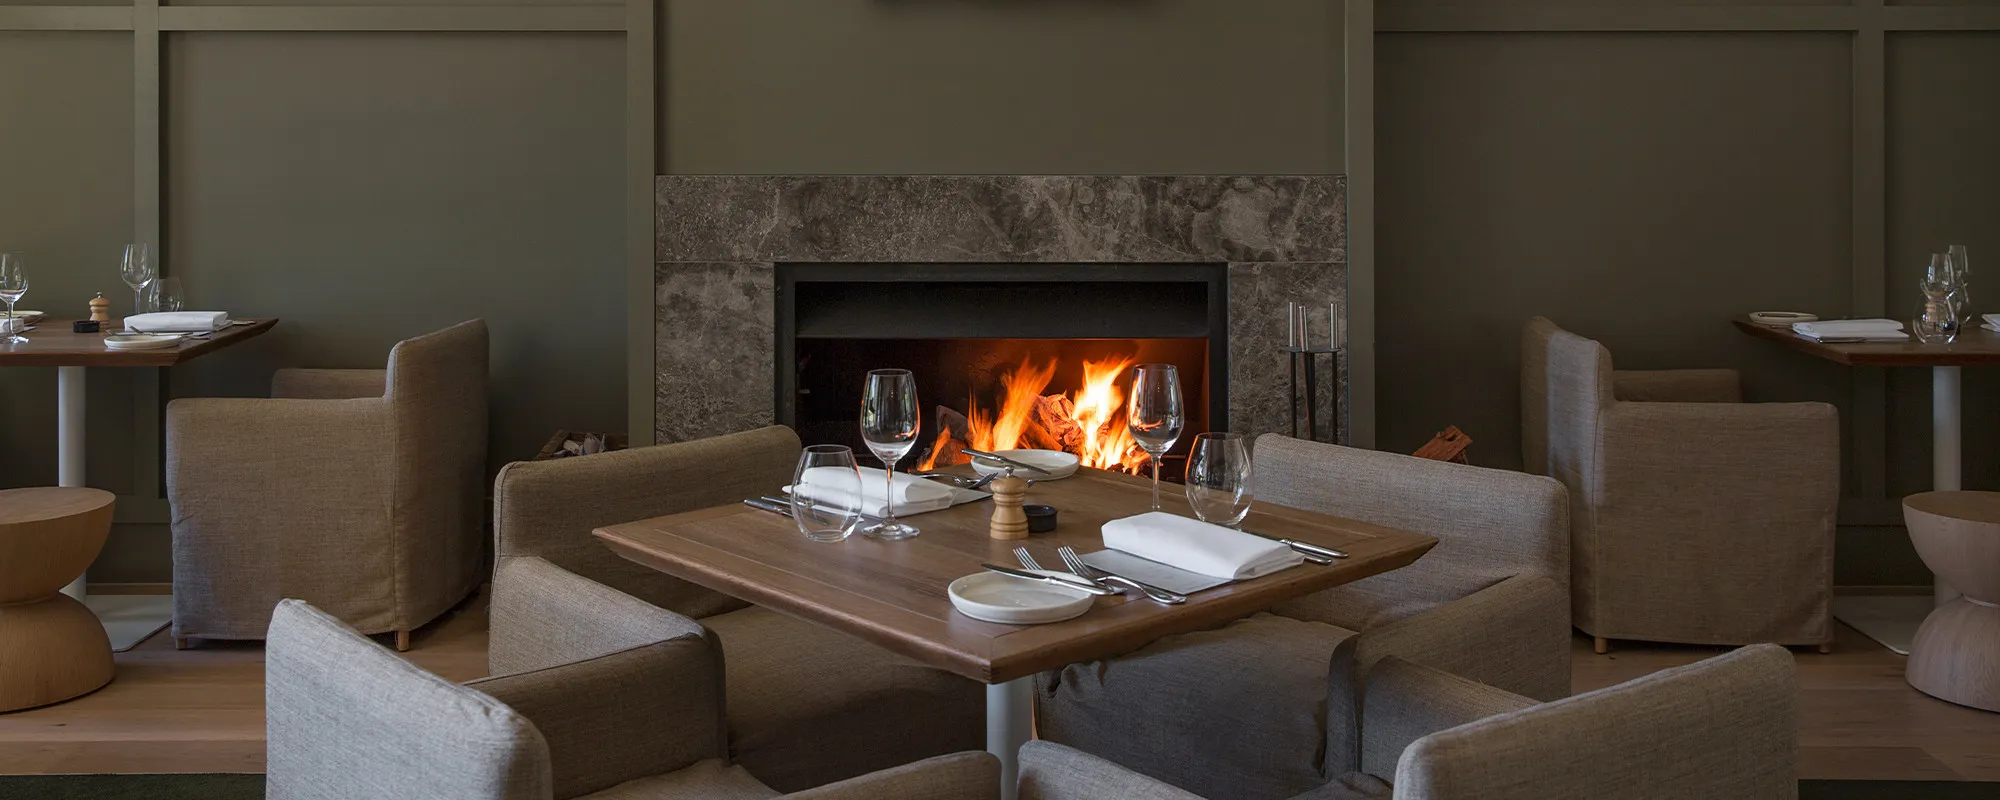 Lancemore Lindenderry Red Hill Boutique Luxury Accommodation Melbourne Food The Dining Room 2000 x 800 9